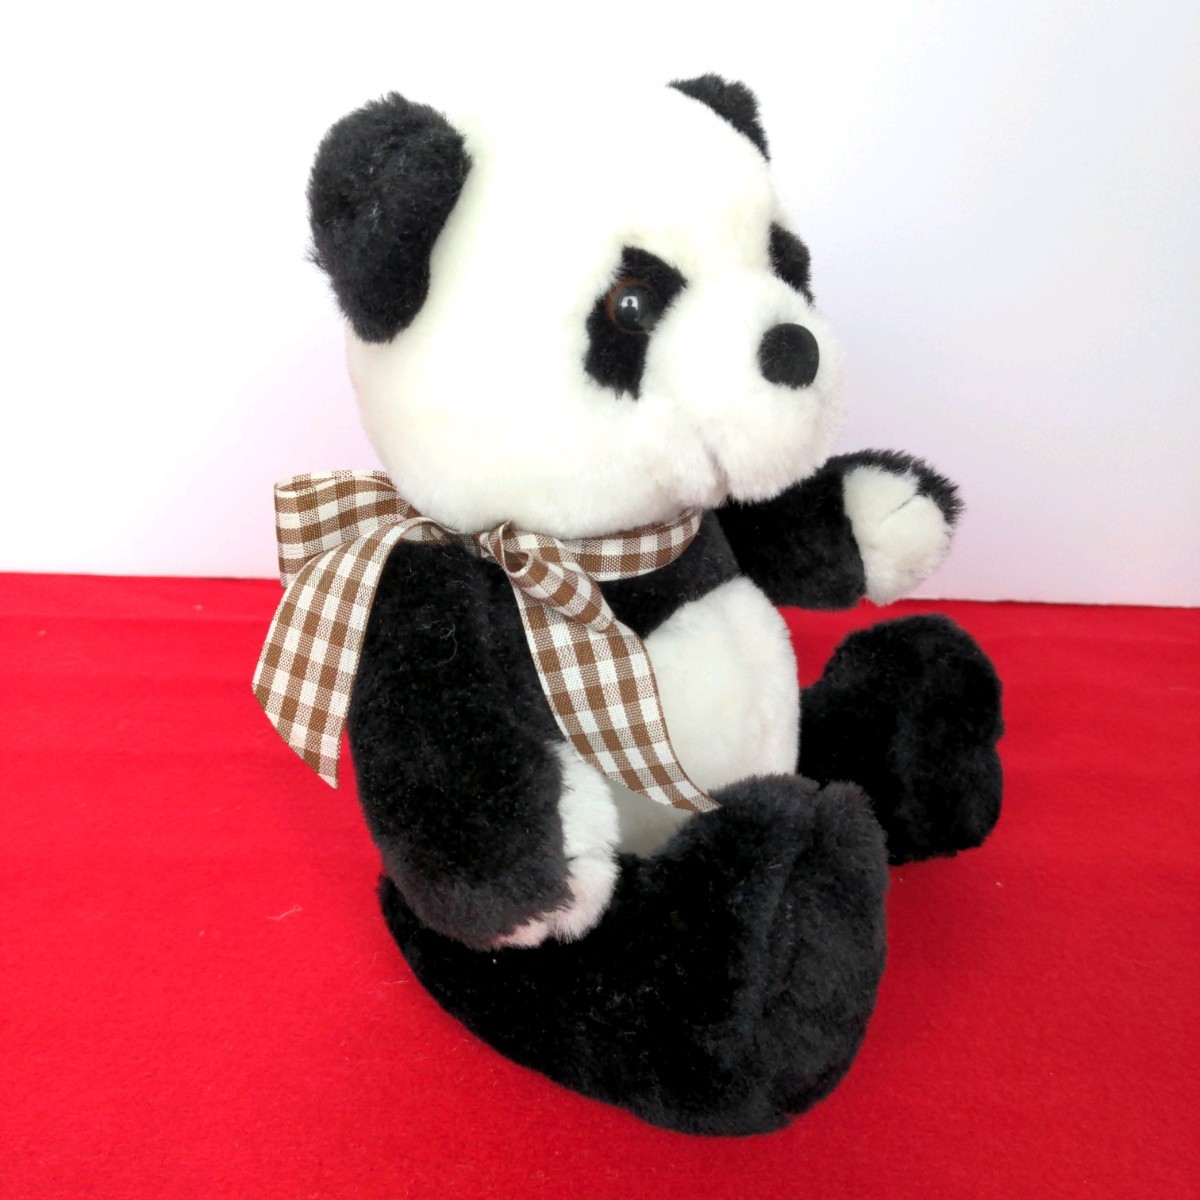  Panda soft toy soft toy ... Panda approximately 20cm silver chewing gum check ribbon tea color lovely soft feel of Showa Retro ..